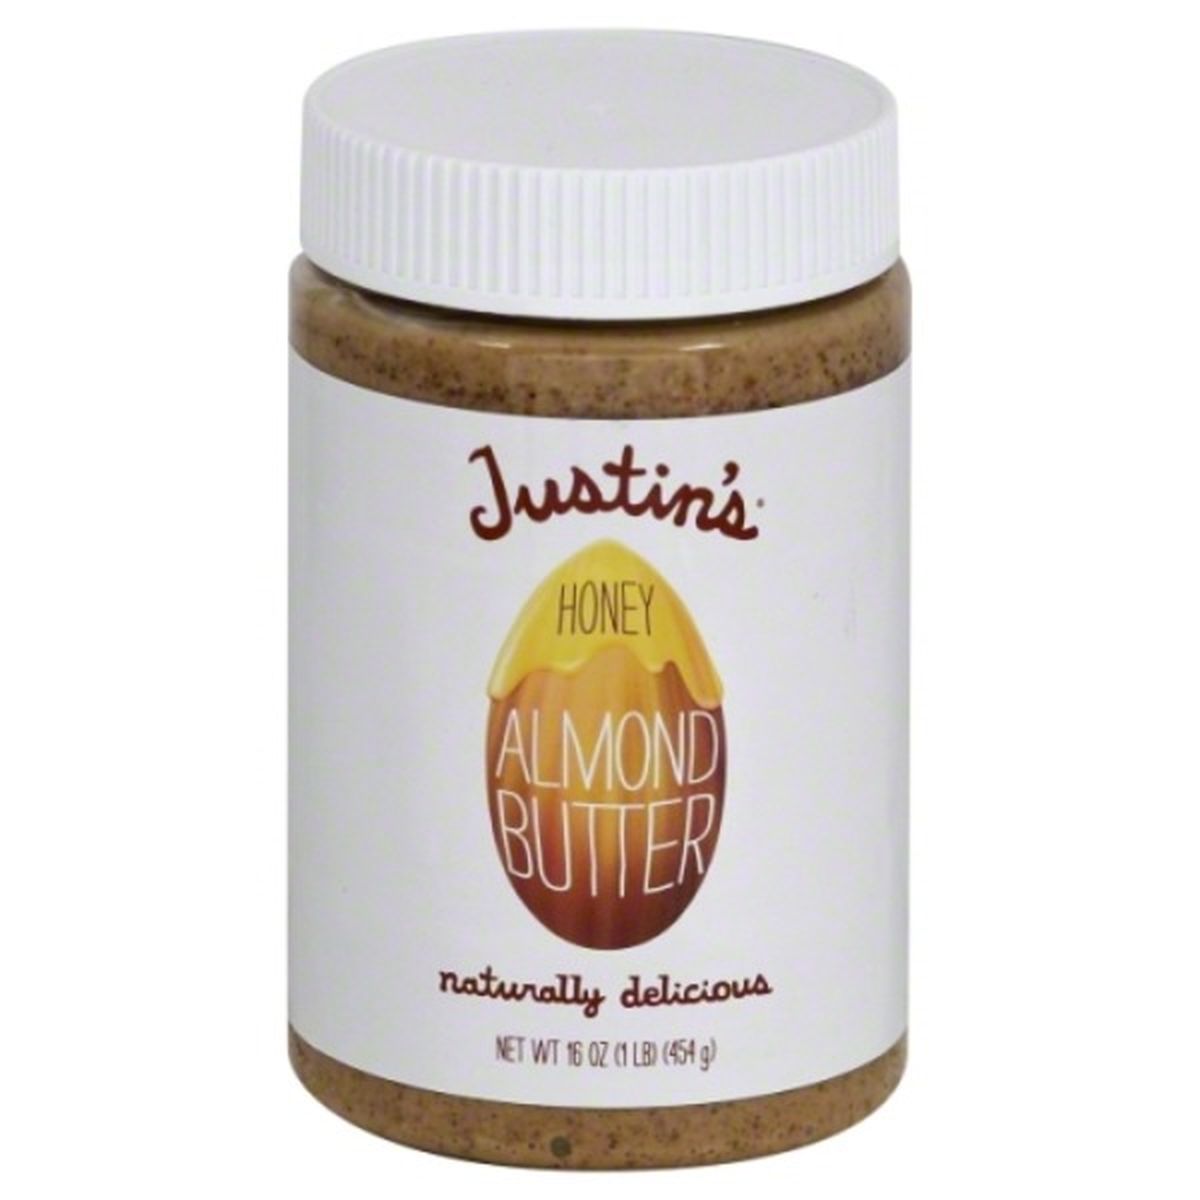 Calories in Justin's Almond Butter, Honey